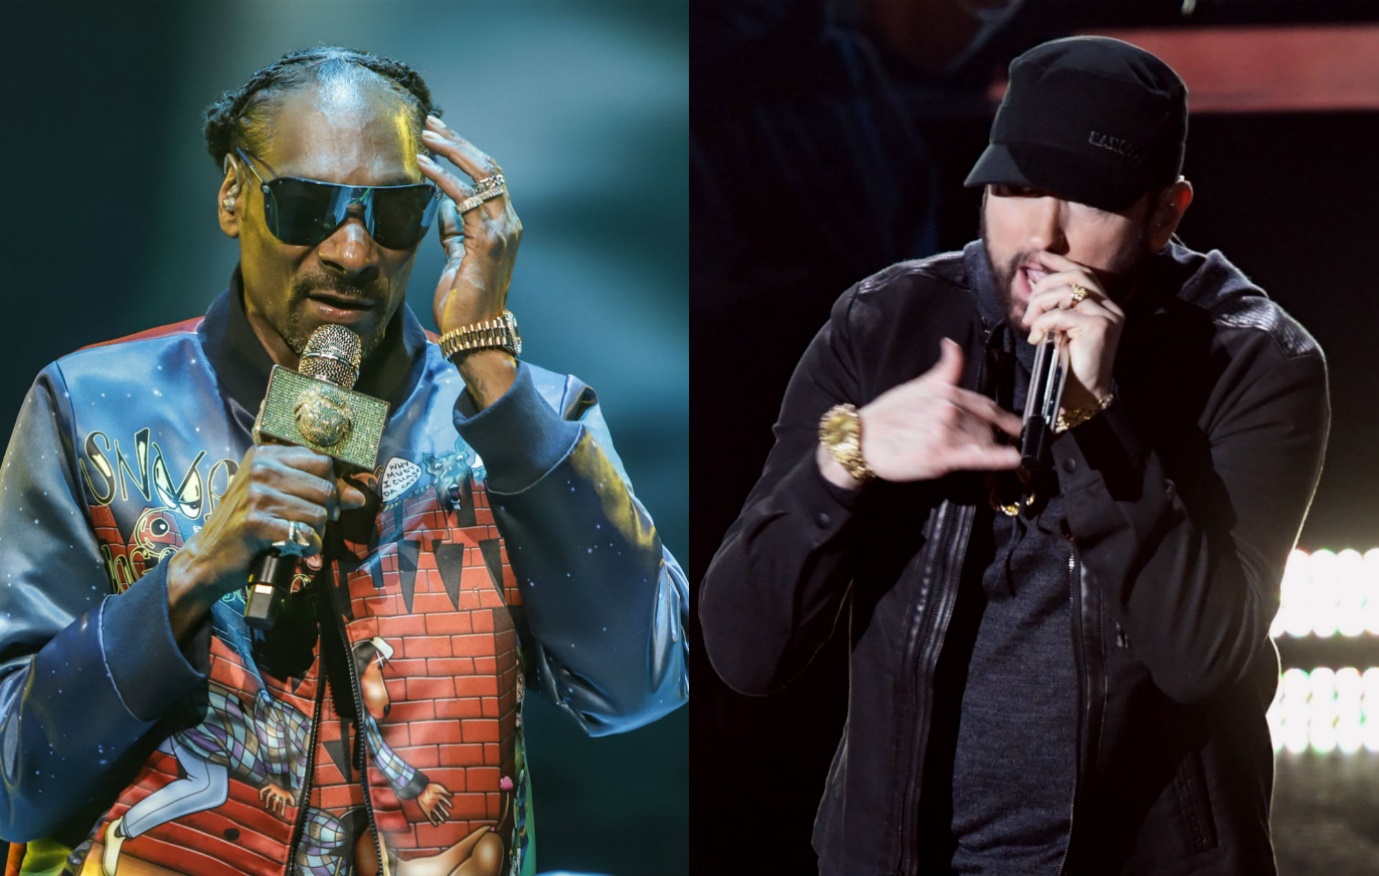 Snoop Dogg and Eminem performing